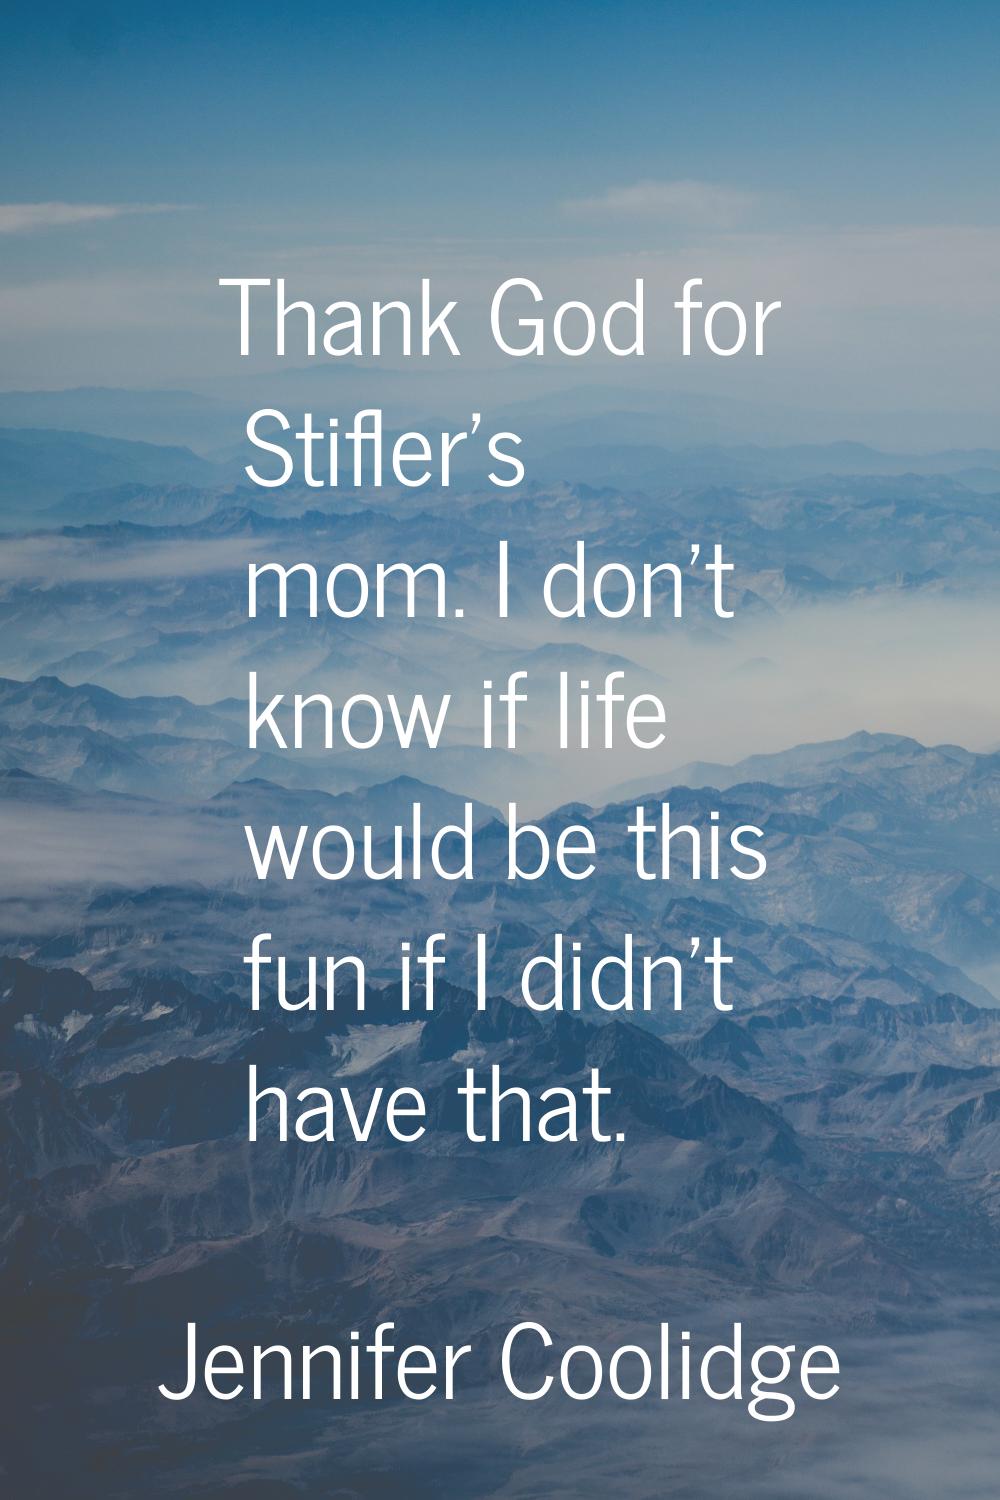 Thank God for Stifler's mom. I don't know if life would be this fun if I didn't have that.